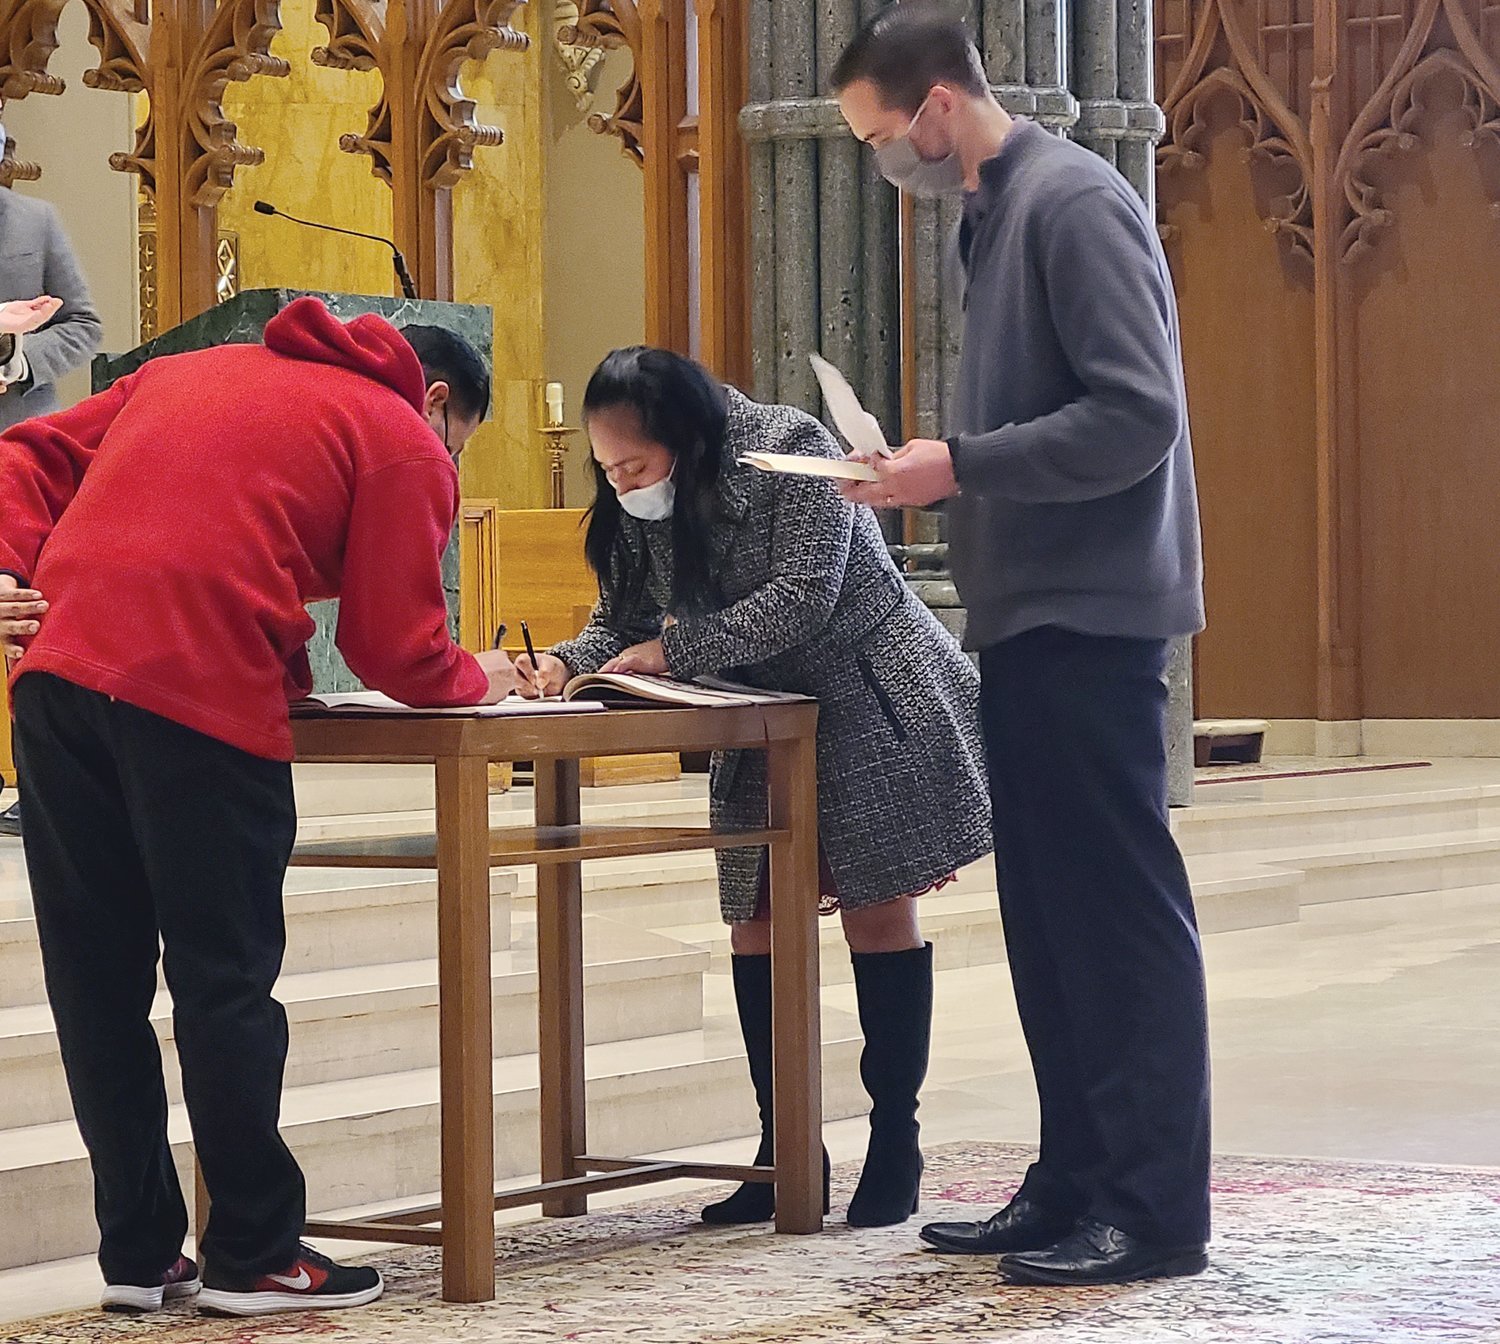 A catechumen signs the Book of the Elect during the Rite of Election, which was held Feb. 21 at the Cathedral of Saints Peter and Paul.